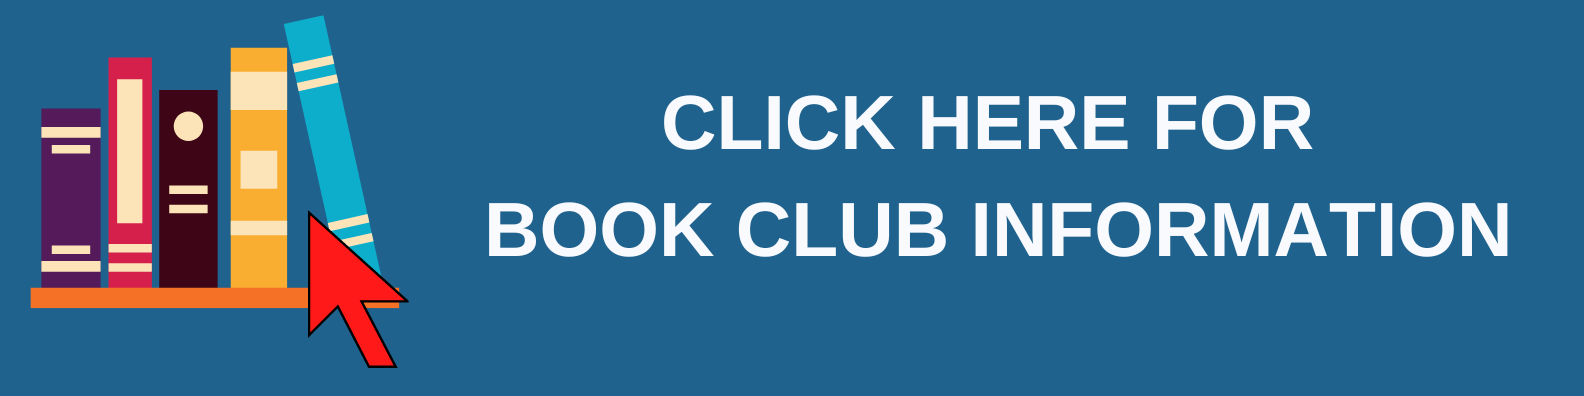 click here for monthly book club